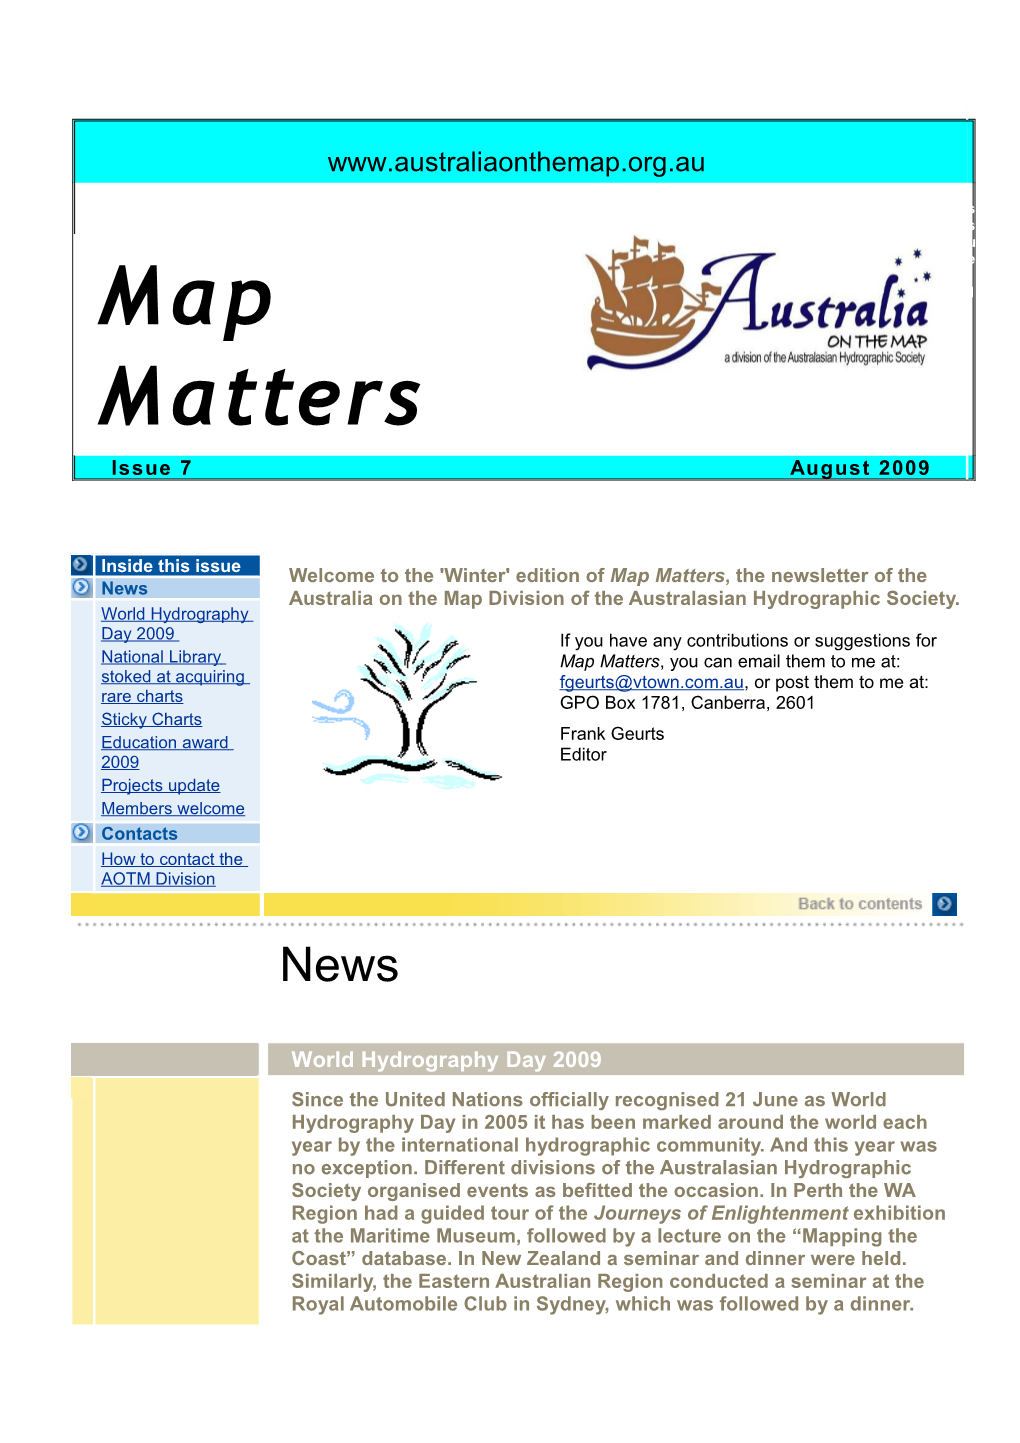 Map Matters, the Newsletter of the News Australia on the Map Division of the Australasian Hydrographic Society